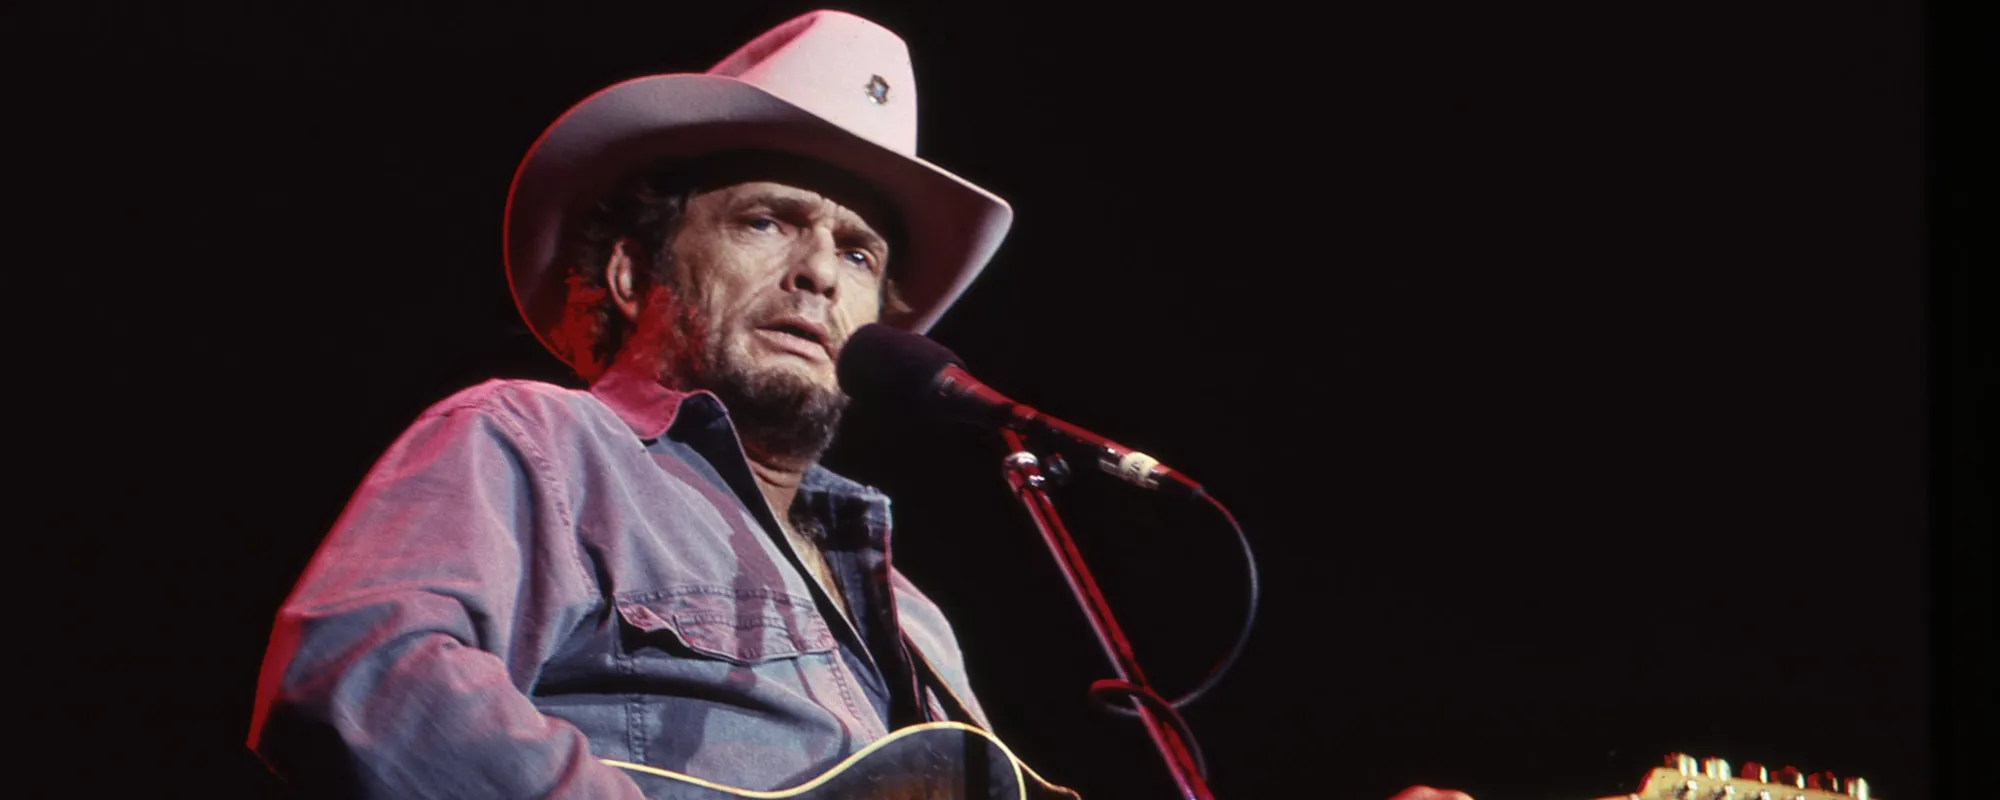 Top 8 Merle Haggard Songs From the ’80s